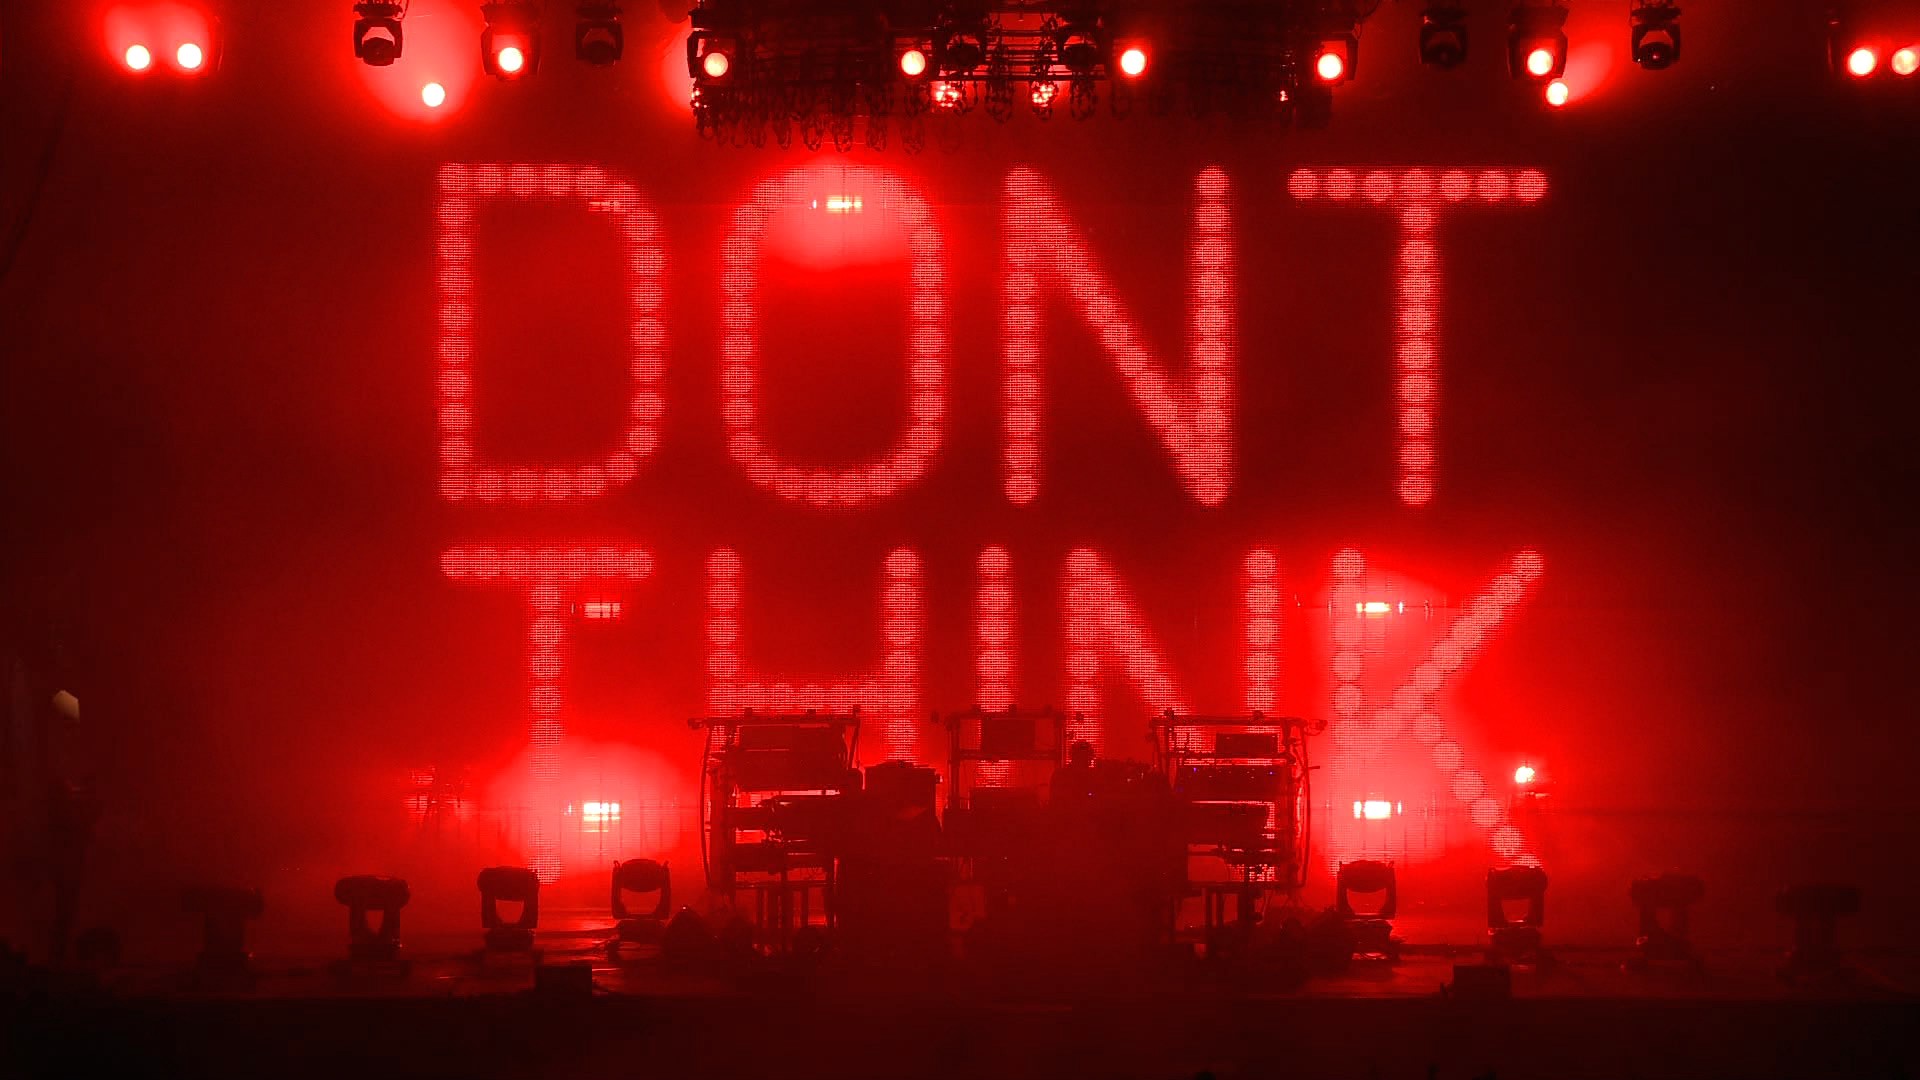 Chemical Brothers: Don't Think is one of the music films on show